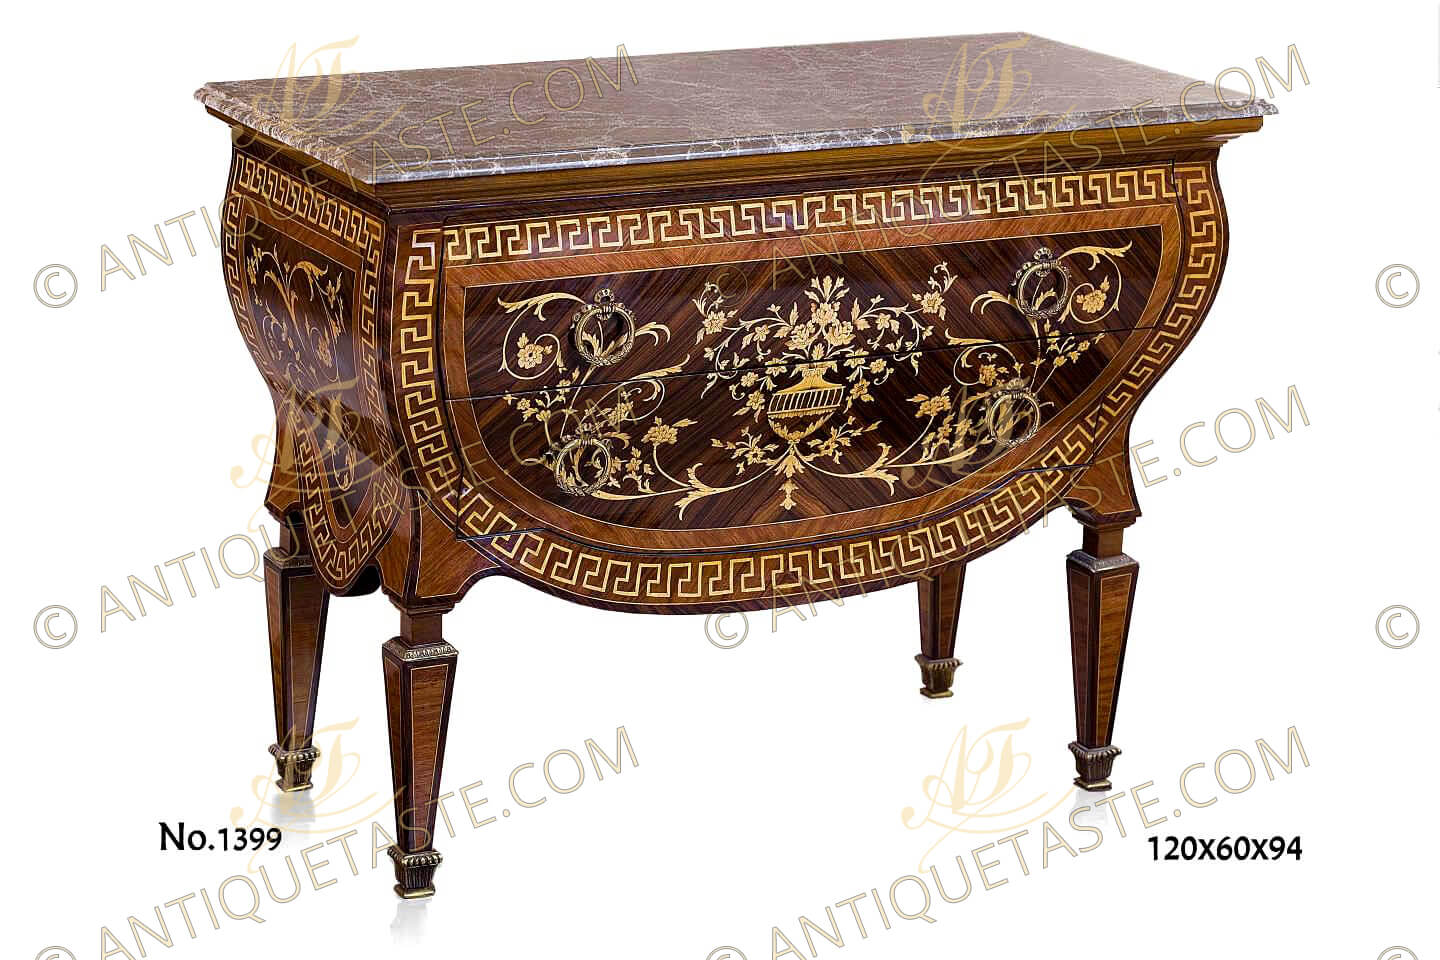 Ignazio Revelli Italian Transitional Louis XV/Louis XVI style ormolu-mounted and marquetry Chest of Drawers